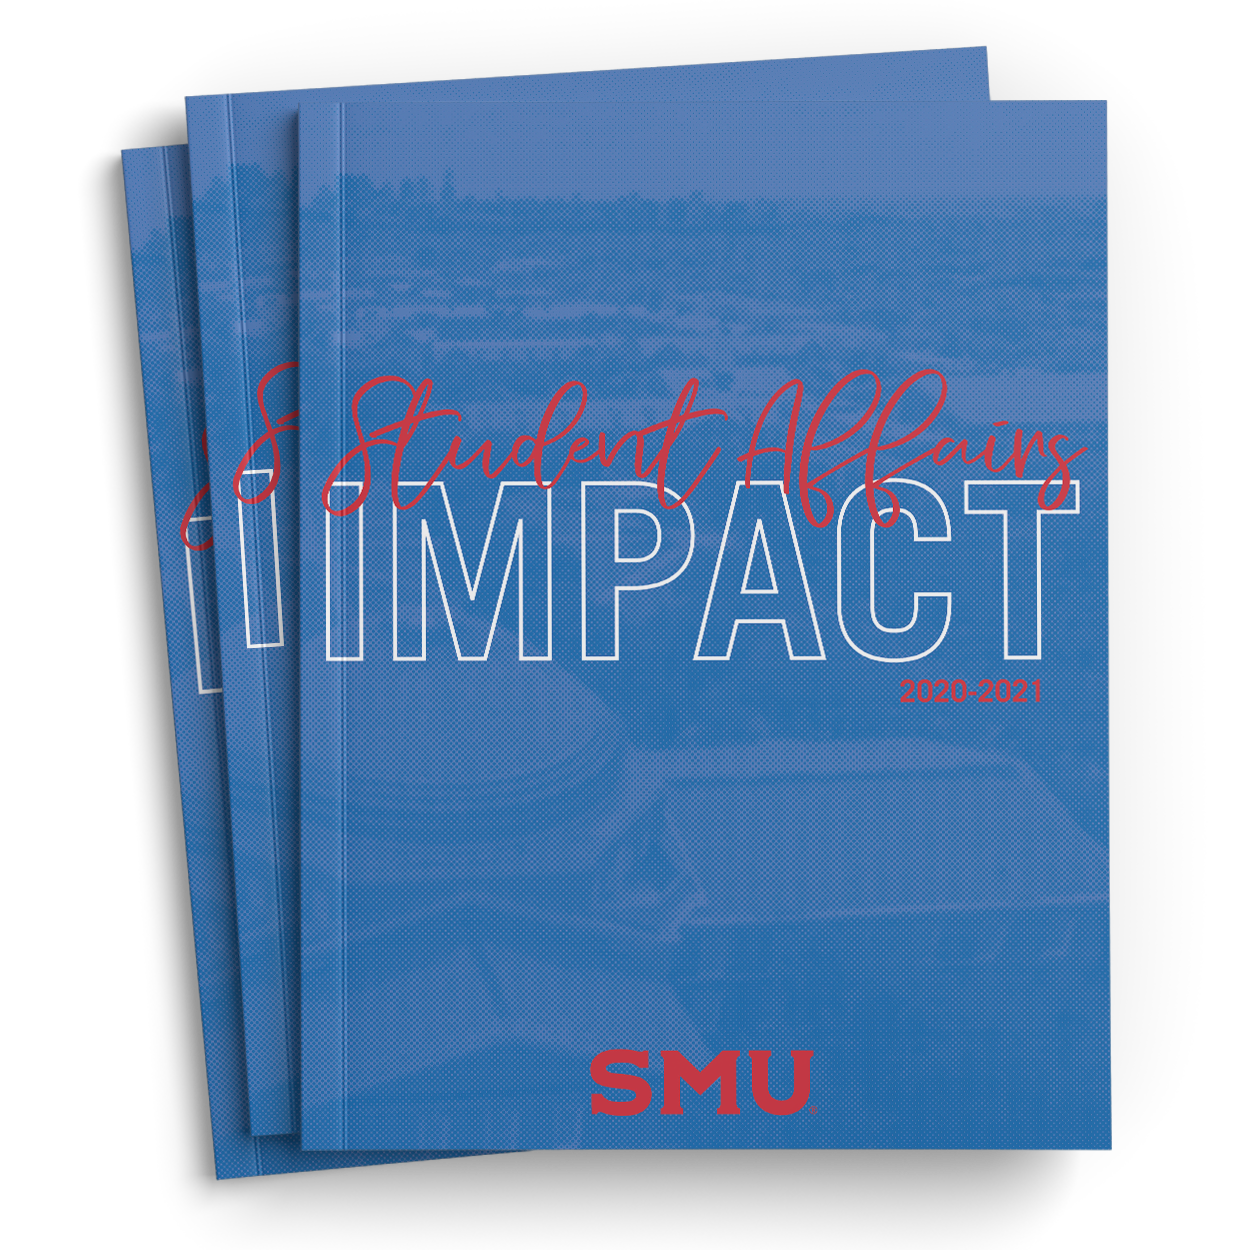 Digital mockup image of the cover of the Impact magazine. There are three blue magazines stacked one top of one another but staggered. The cover says "Student Affairs" in a script font, and "Impact" in a bold white outline font.